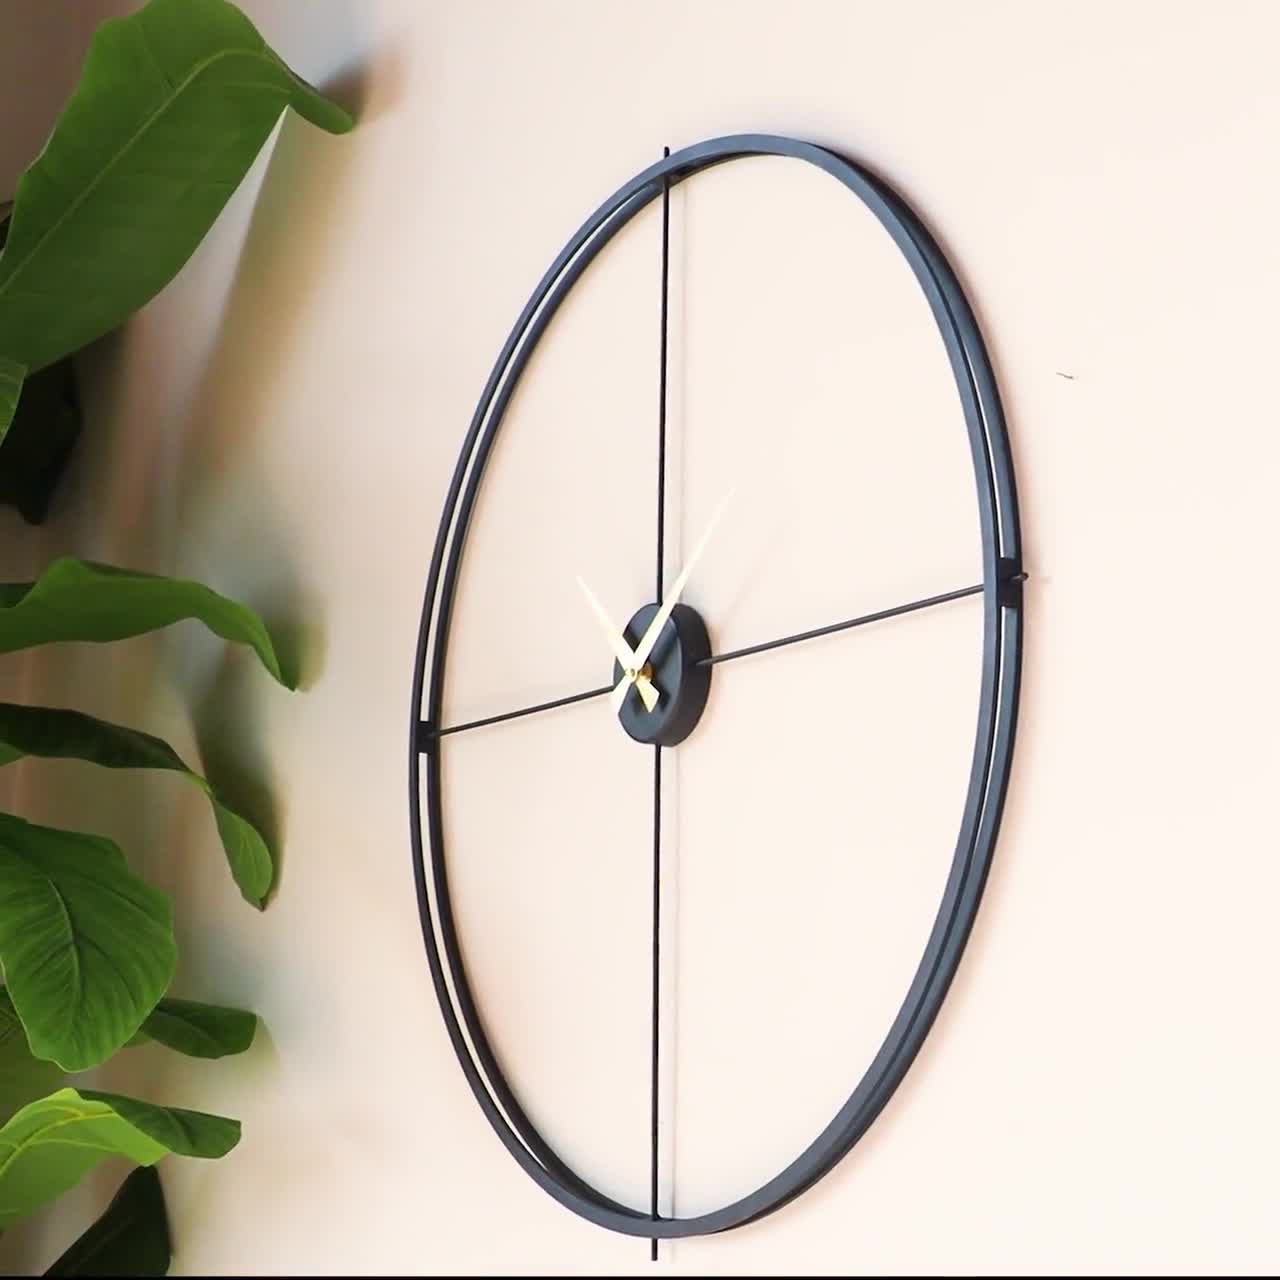  YISITEONE Large Decorative Wall Clock for Living Room